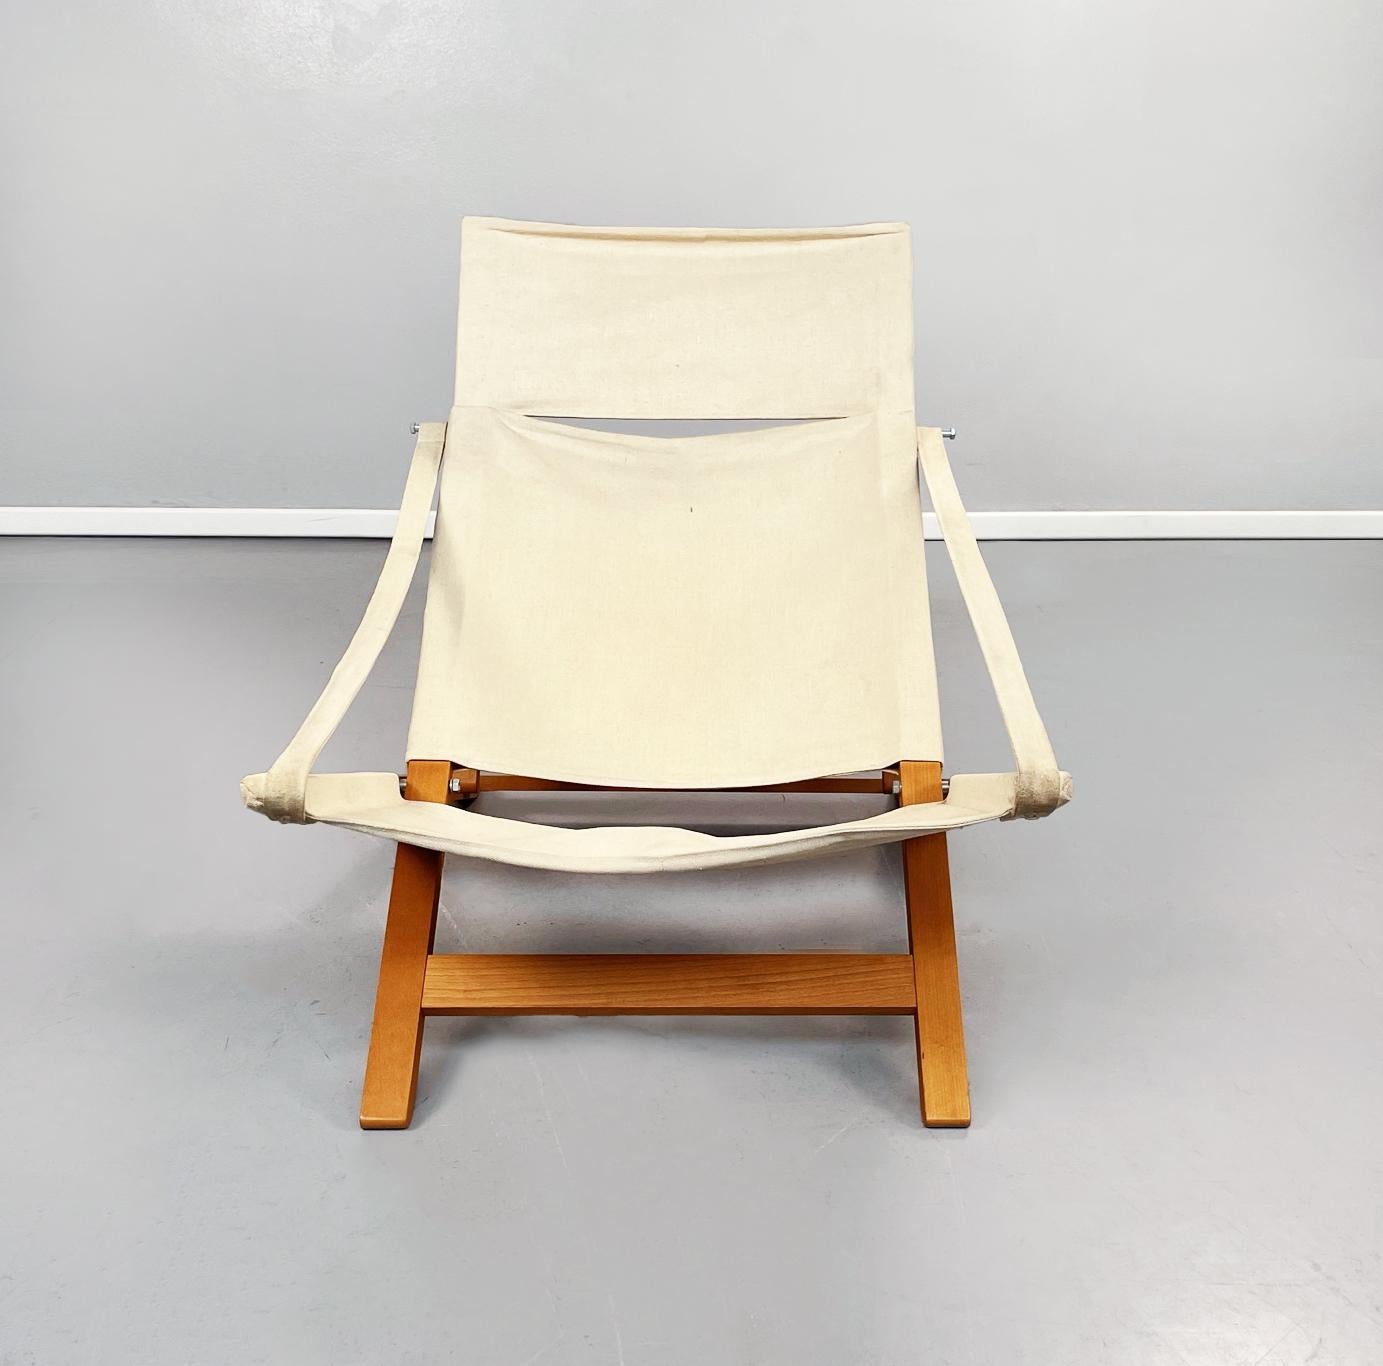 Denmark mid-century Folding deck chair in wood and cream fabric by Cado, 1960s
Folding deck chair with wooden structure. The seat and the back are made up of 3 parts in cream-colored fabric, held taut by the structure. The armrests are composed of